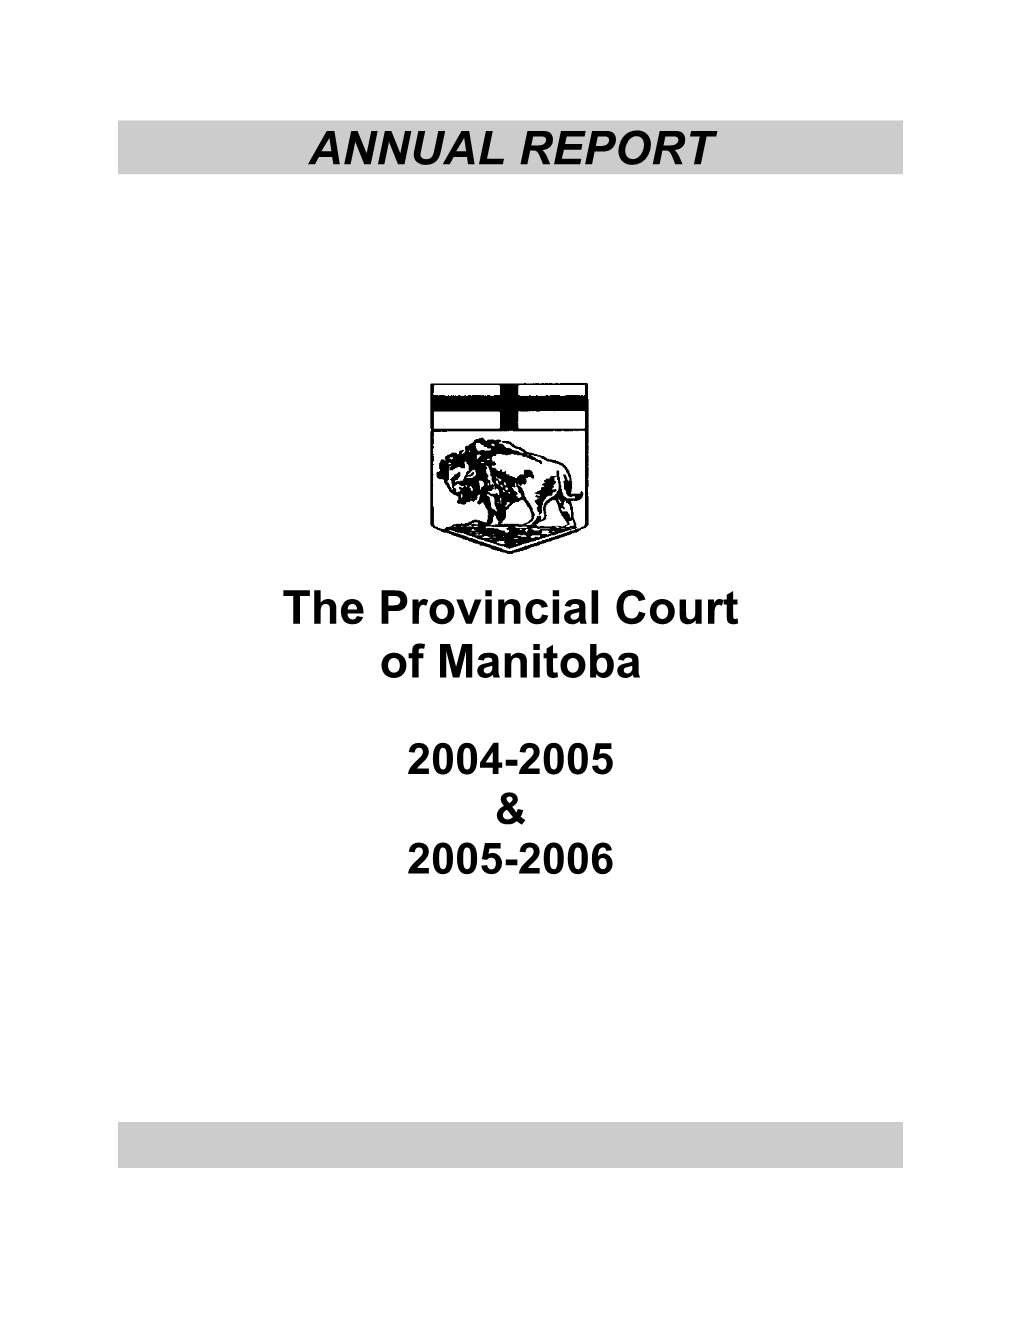 ANNUAL REPORT the Provincial Court of Manitoba